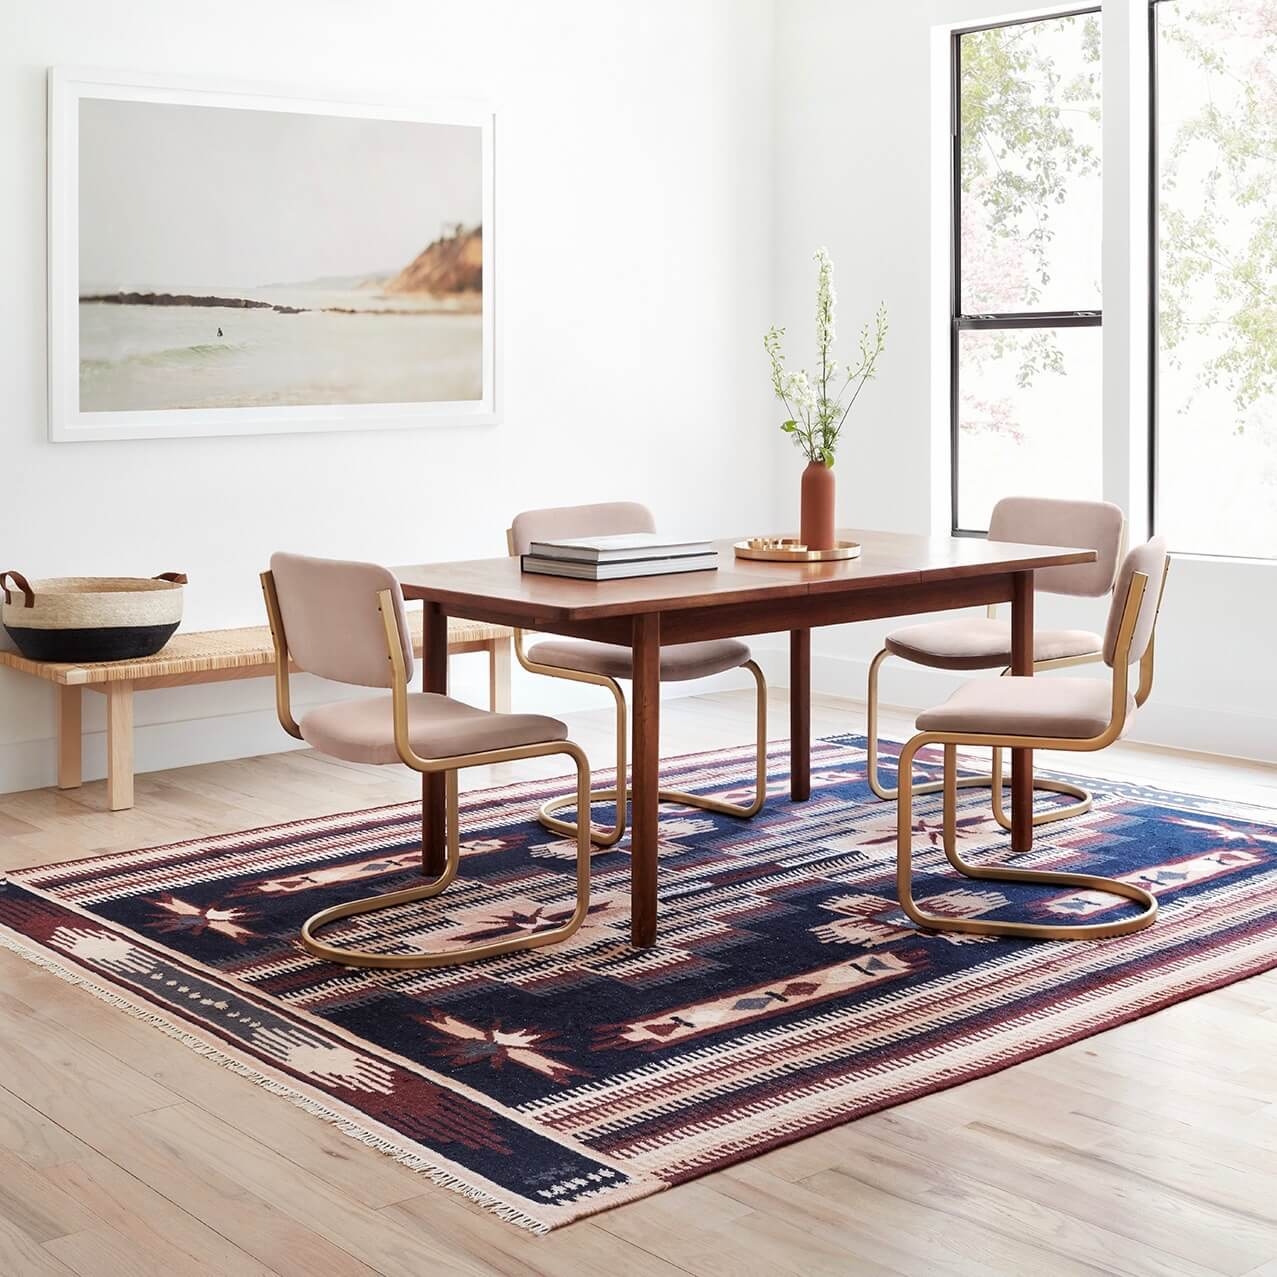 The Citizenry Keya Handwoven Area Rug | 10' x 14' | Made You Blush - Image 2